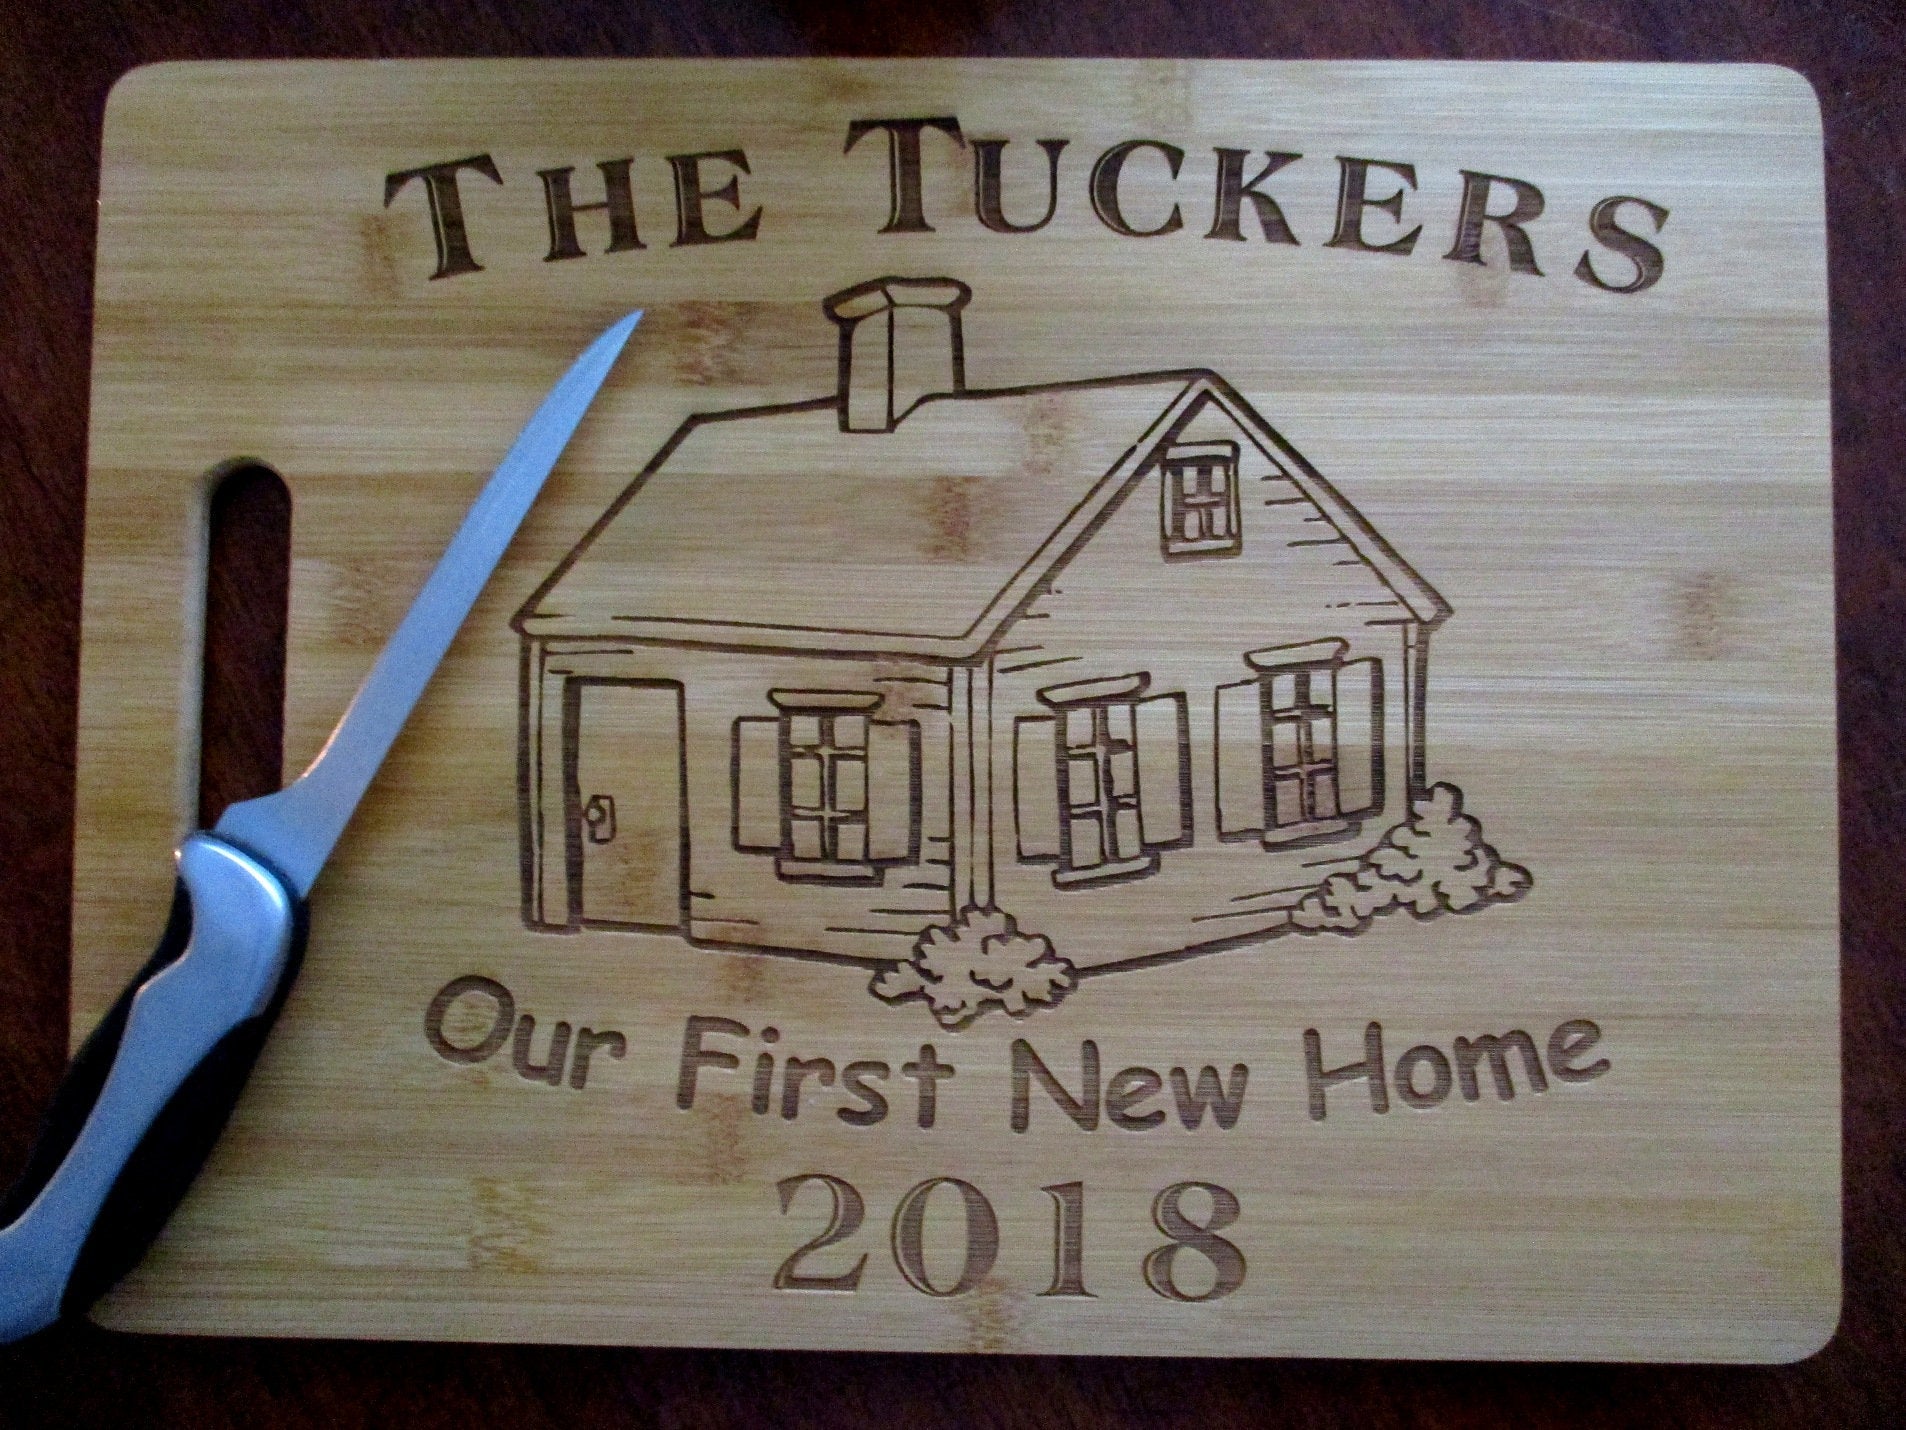 Personalized Cutting Board, Engraved Cutting Board, Couples Gift